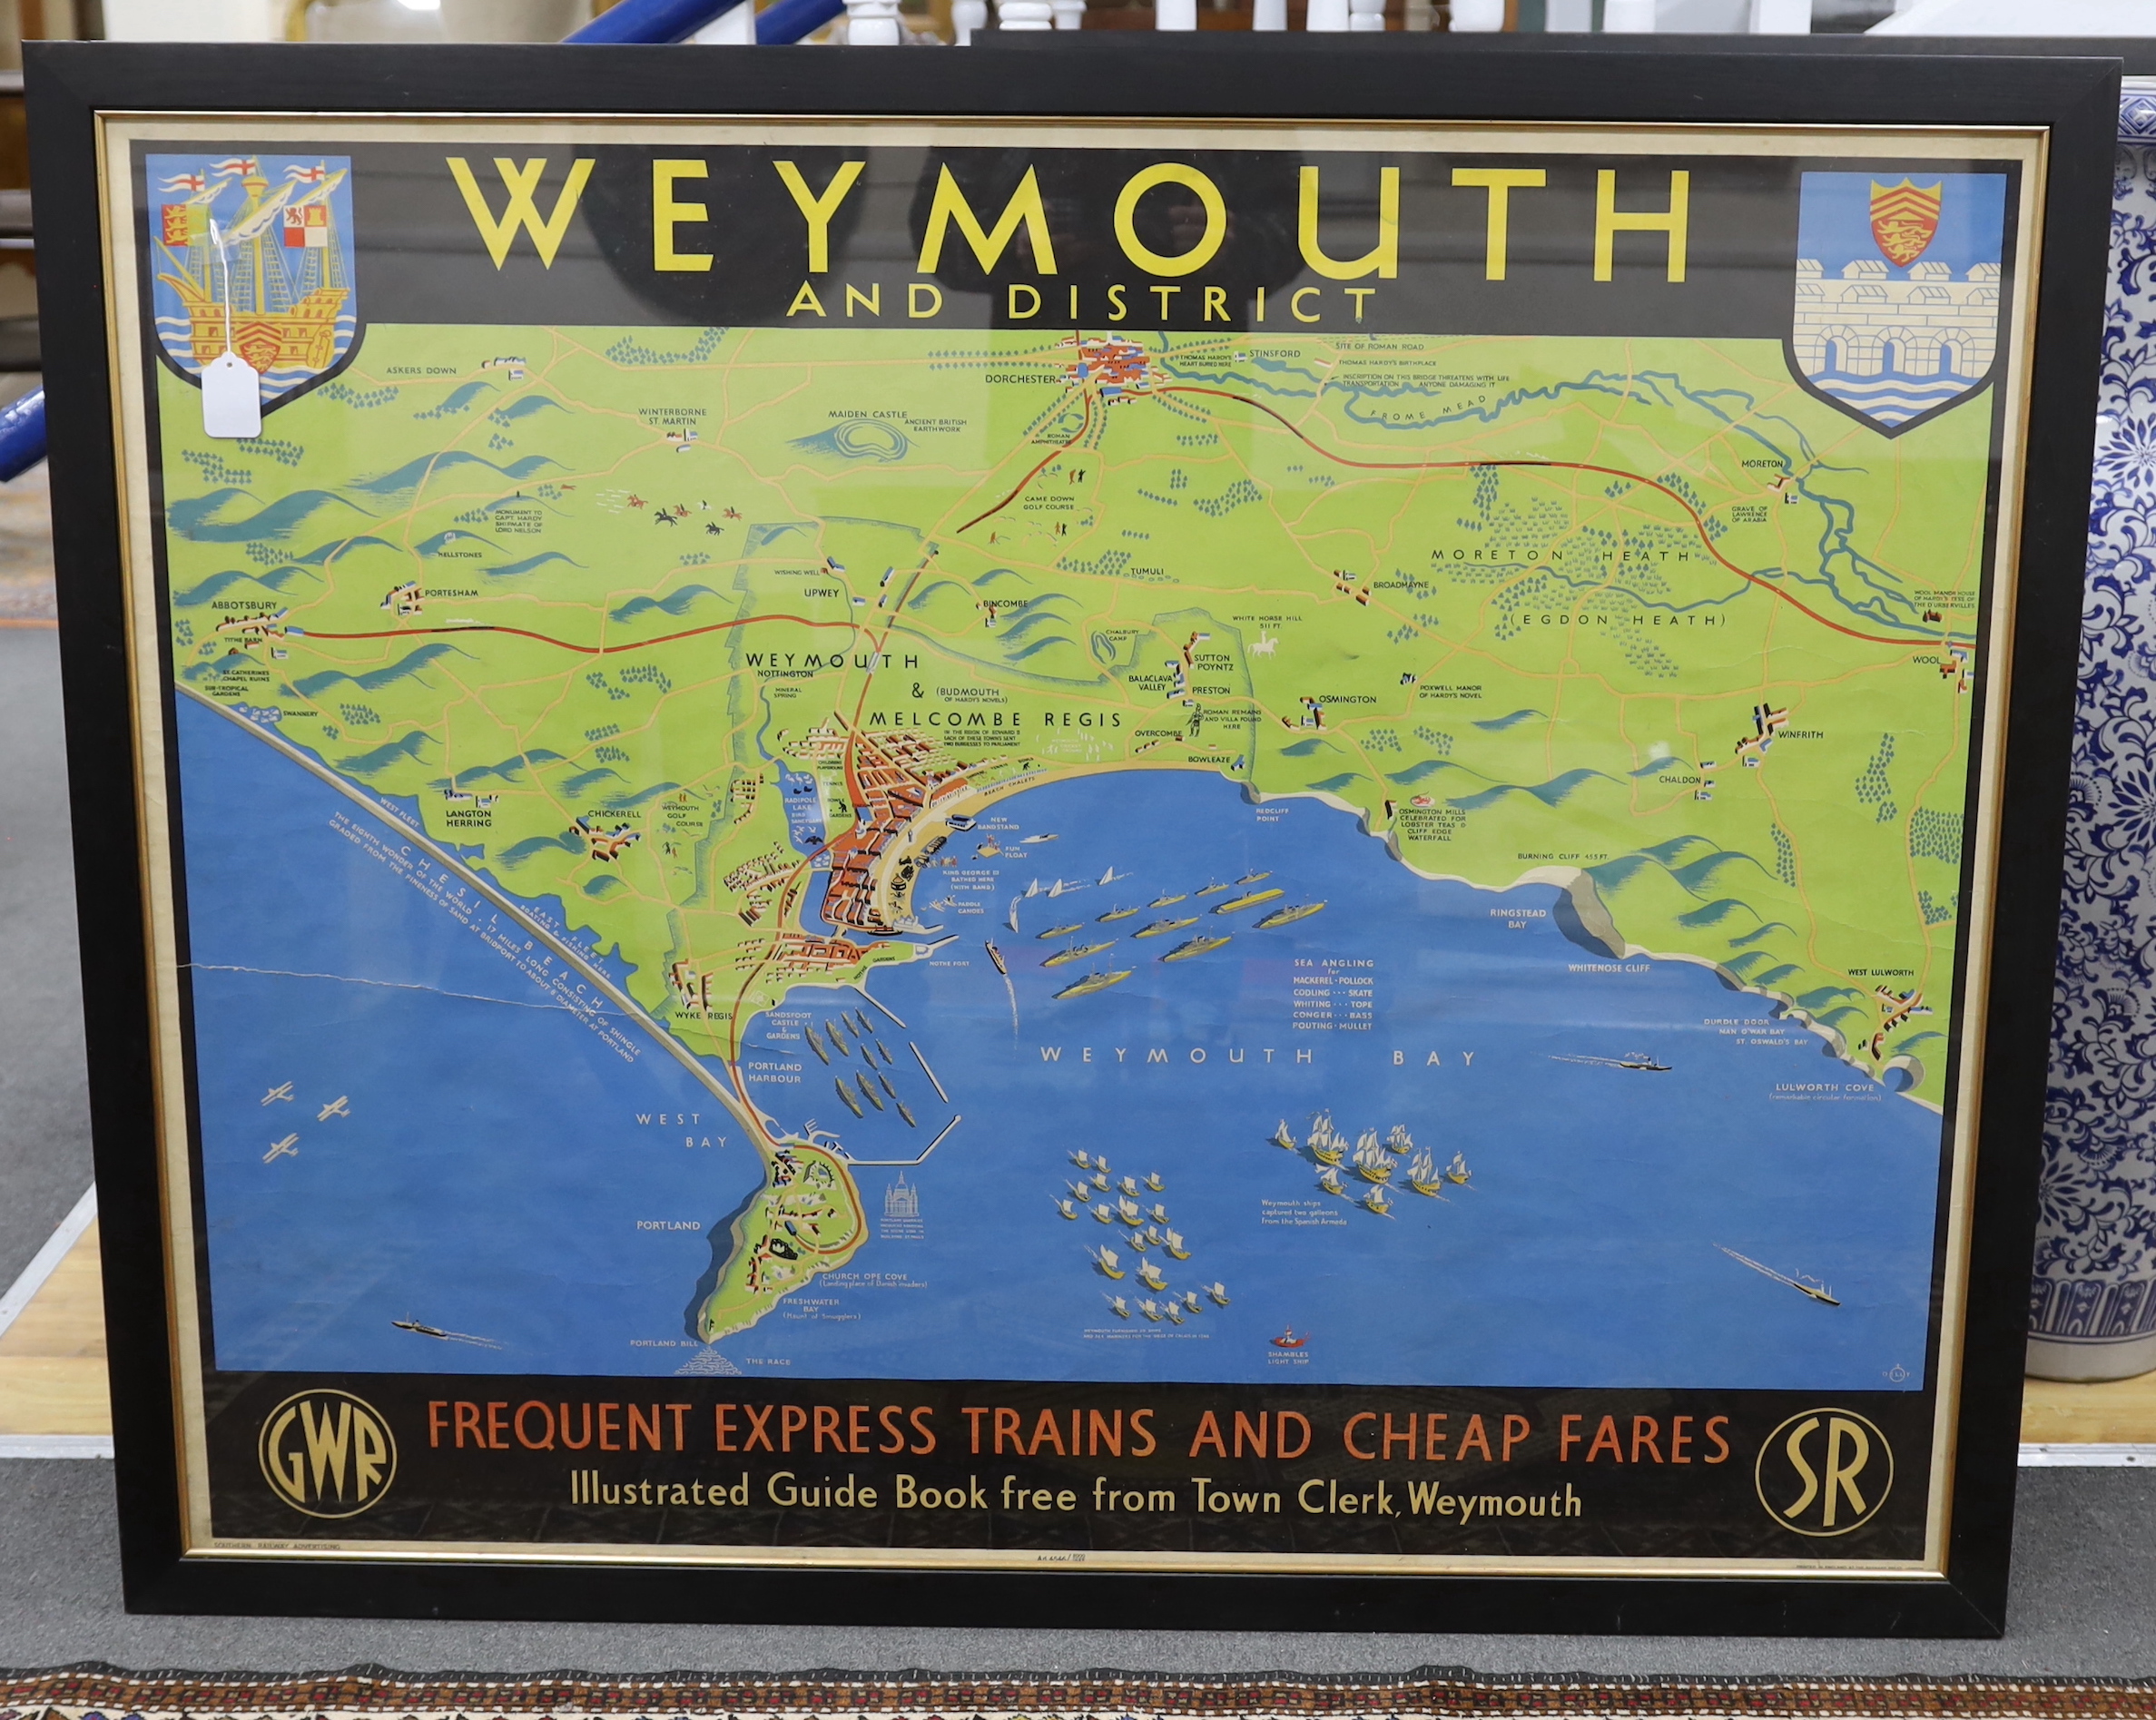 A framed Southern Railway Advertising SR and GWR original poster, 'Weymouth and District' by Dilly, original poster printed by The Baynard Press, 99 x 125cm